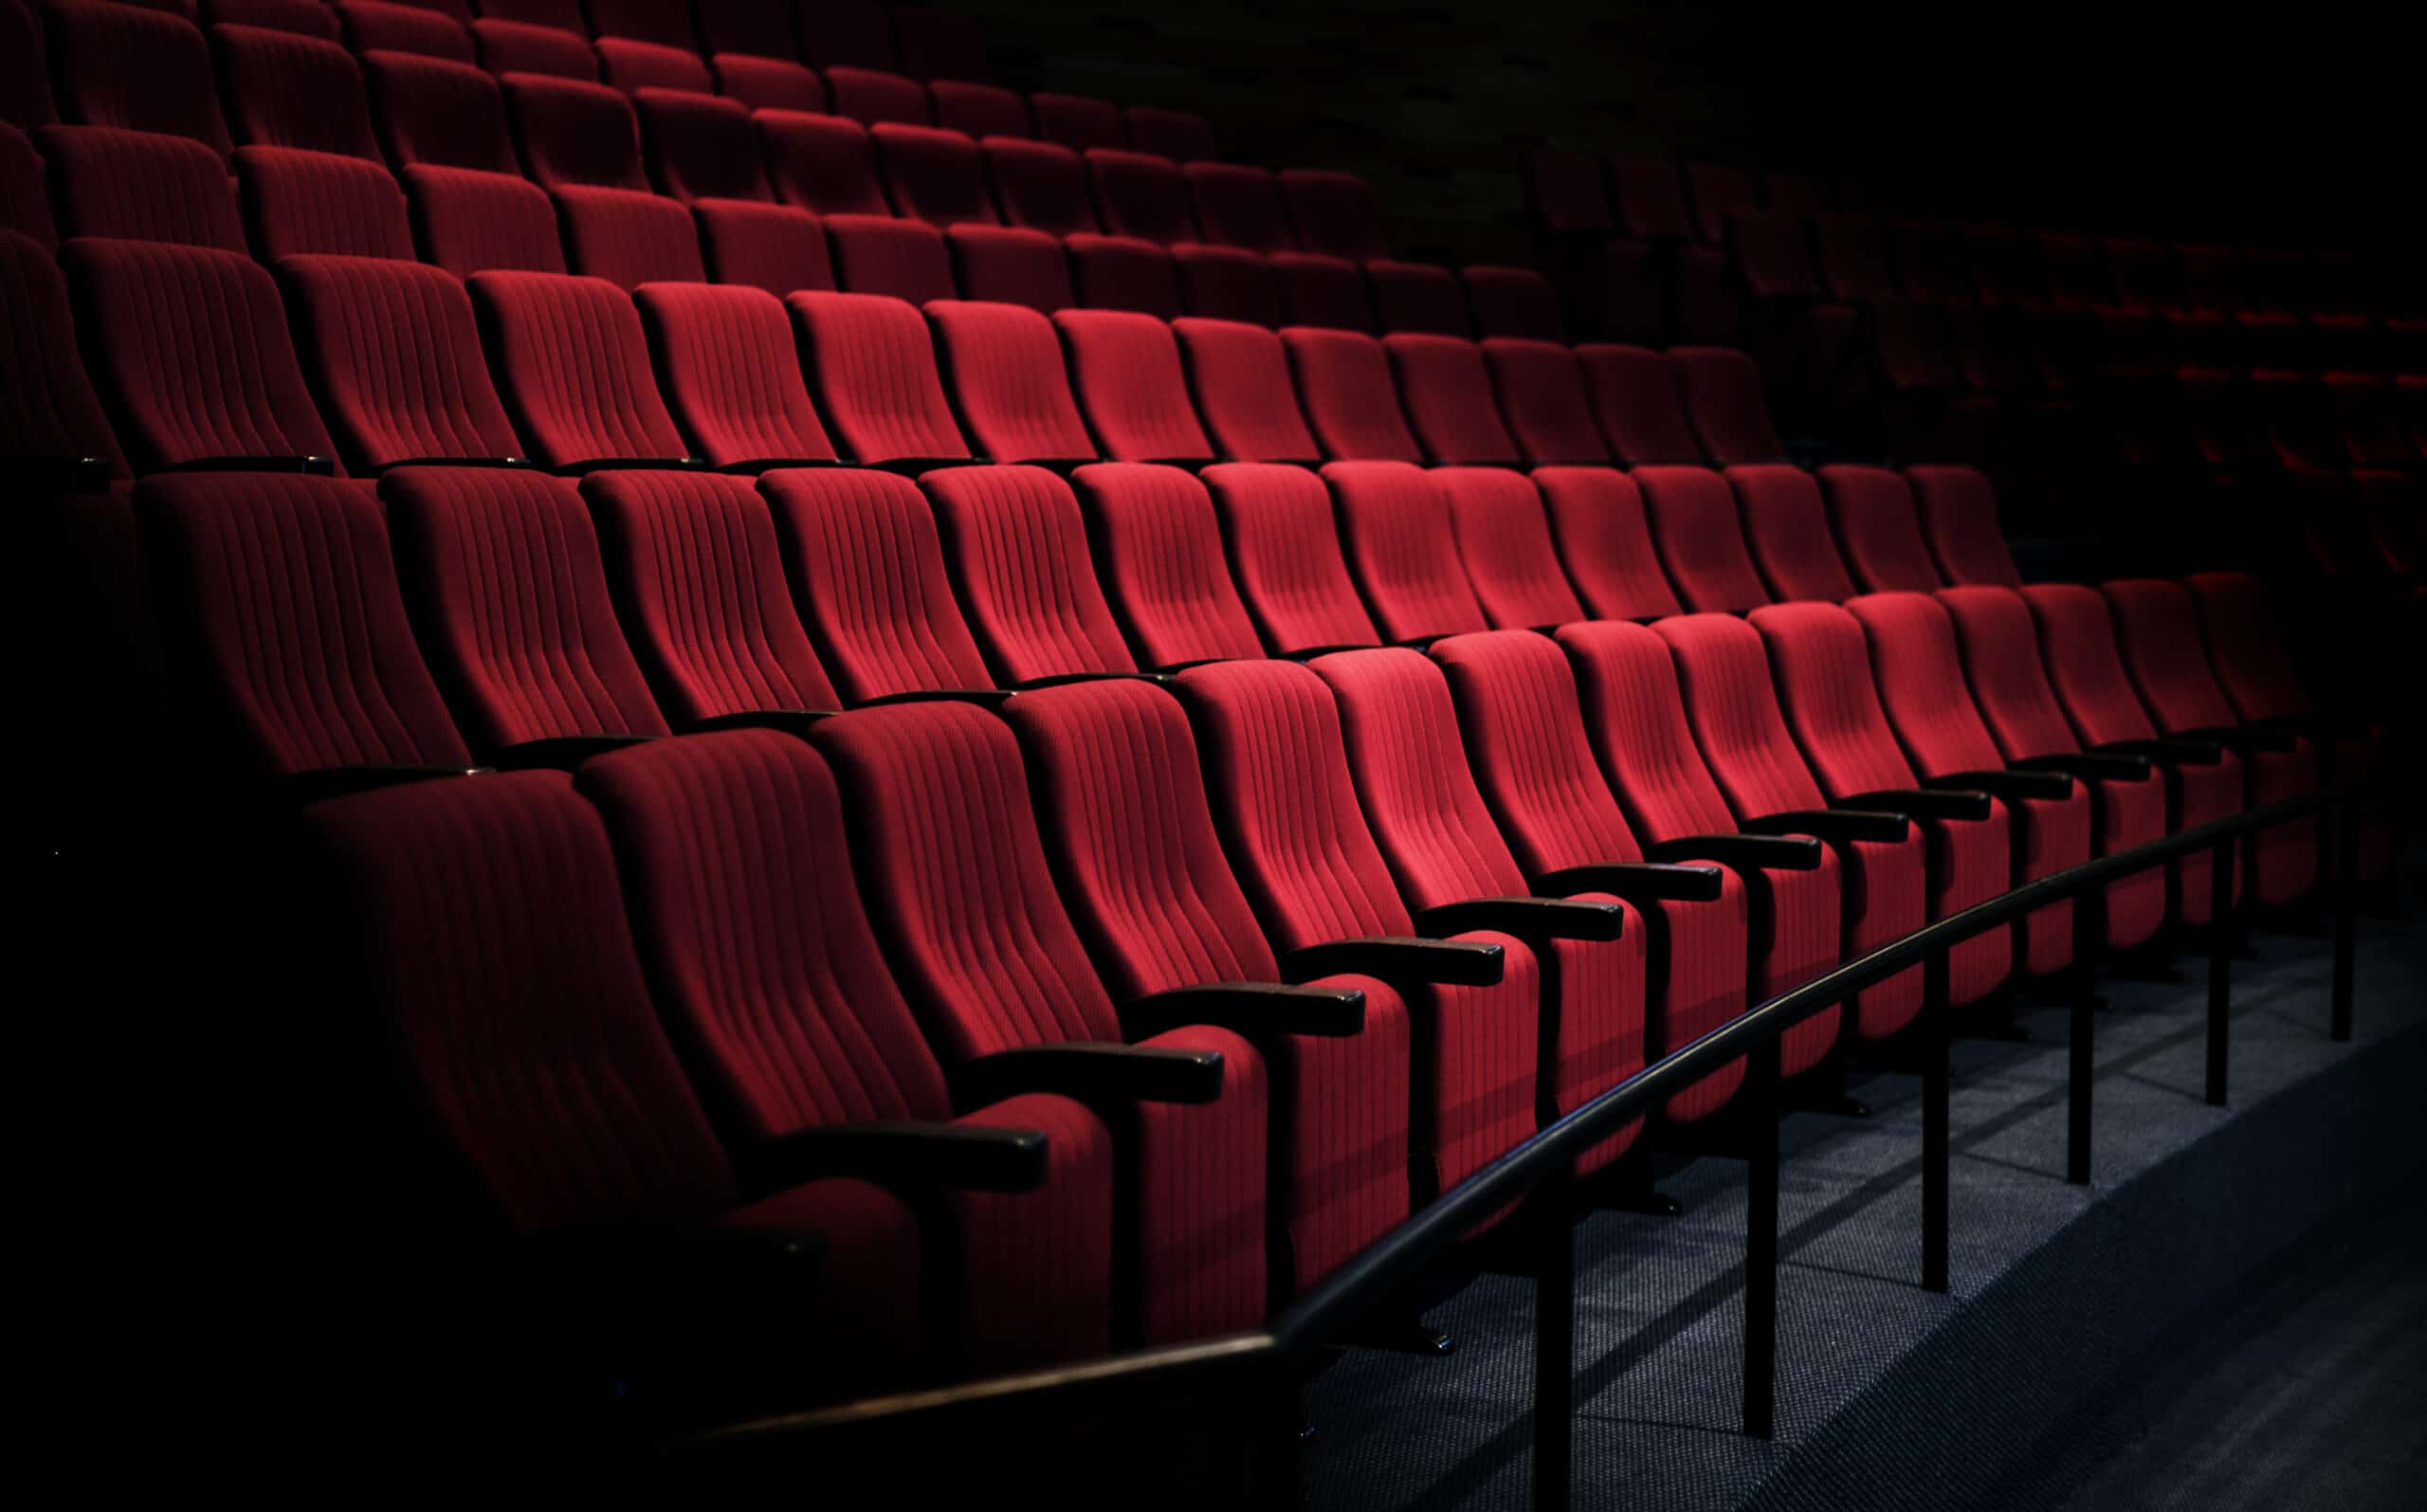 Rows Of Red Seats In A Theater